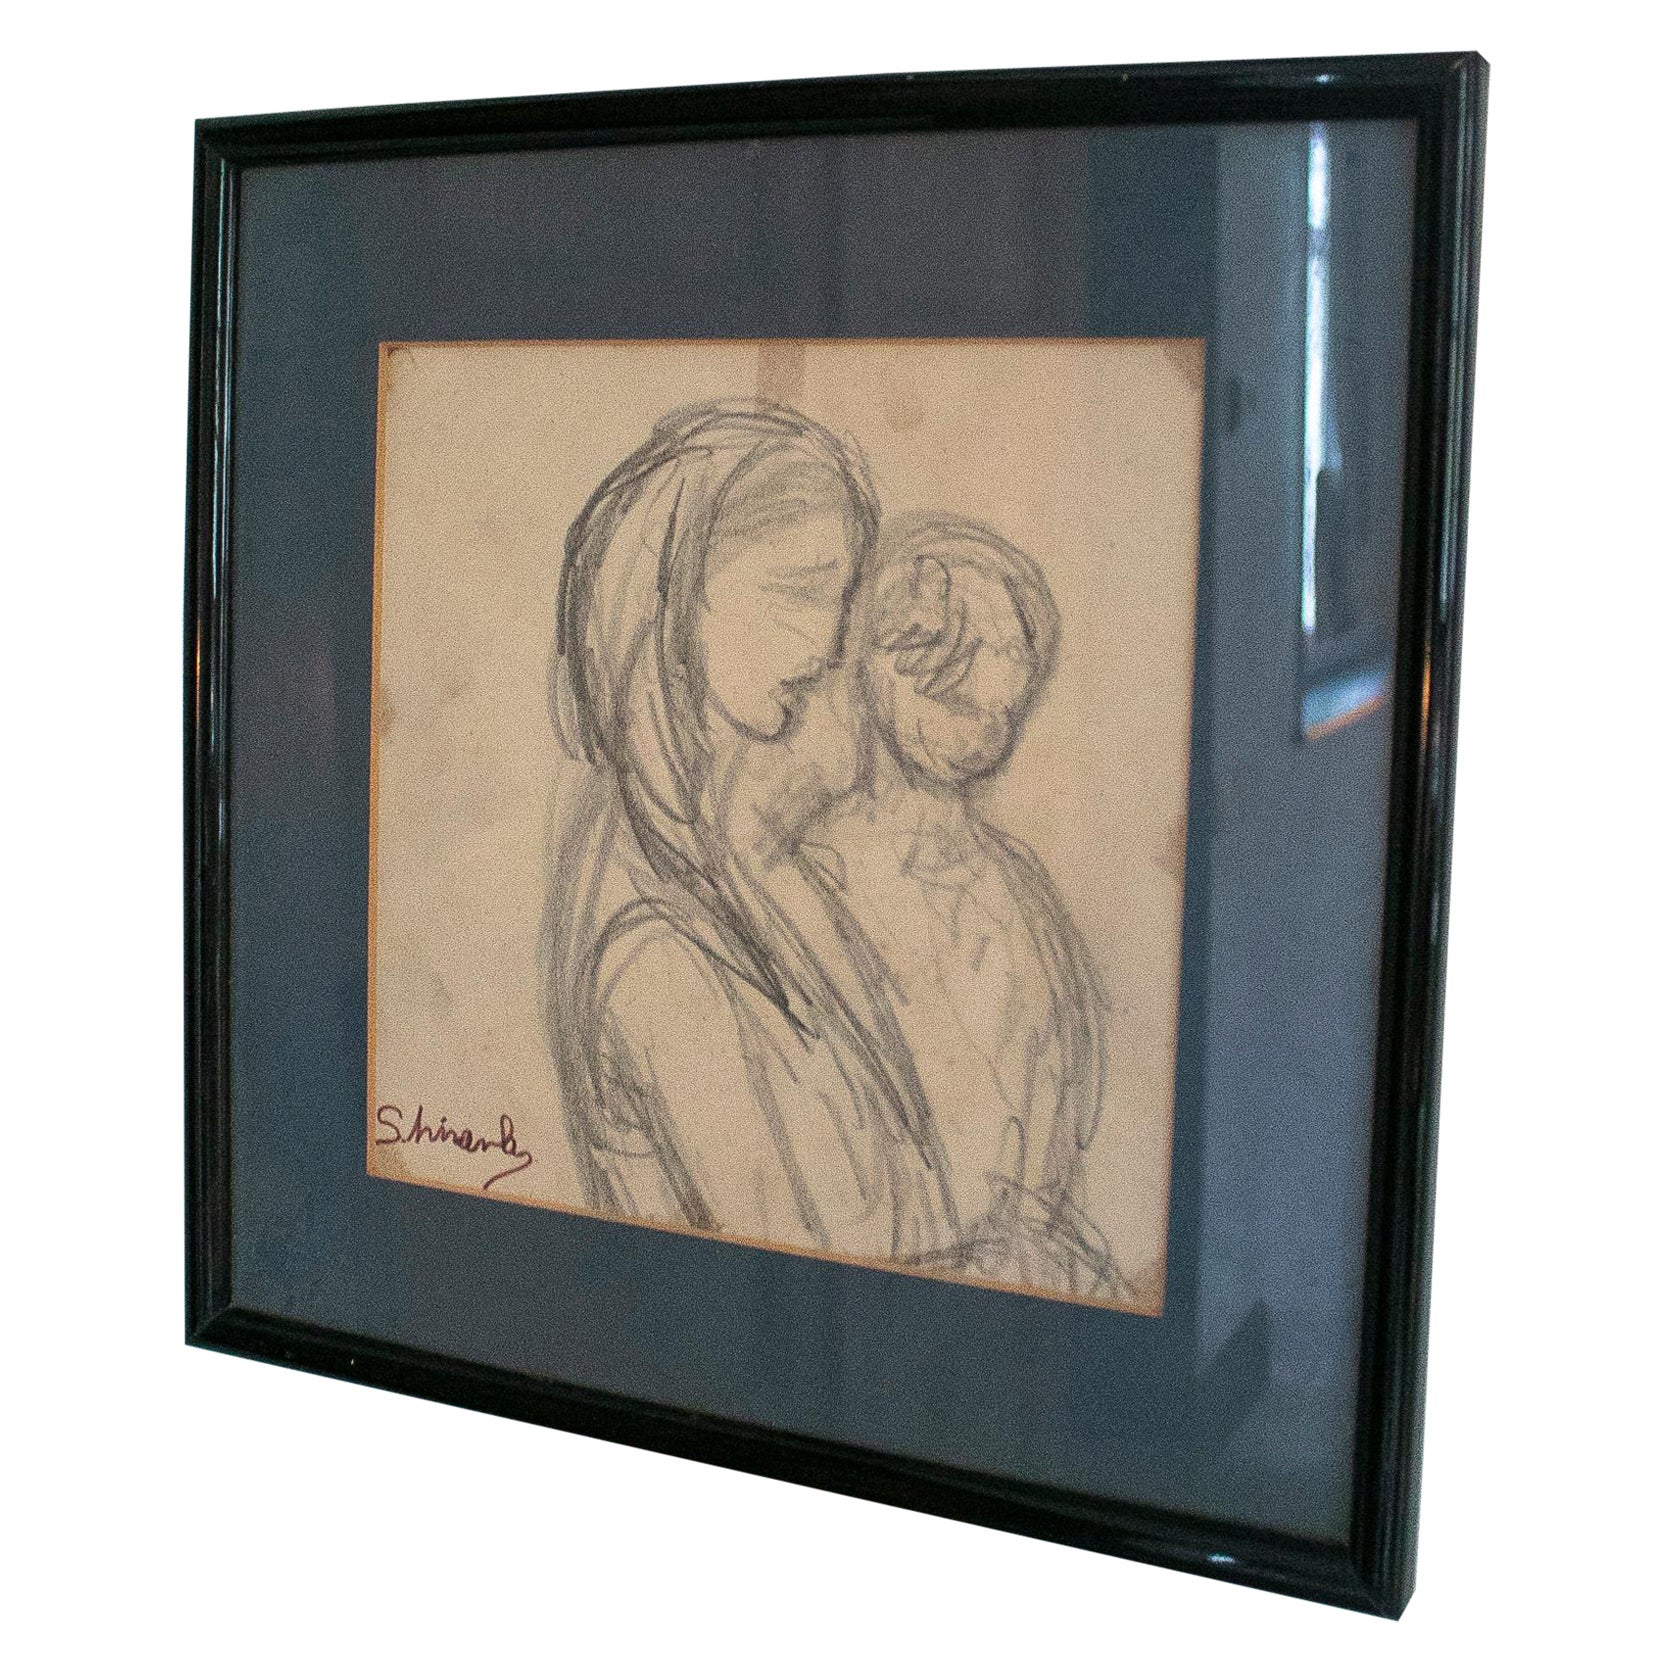 1970s Spanish Woman w/ Child Pencil Drawing Portrait Framed & Signed 